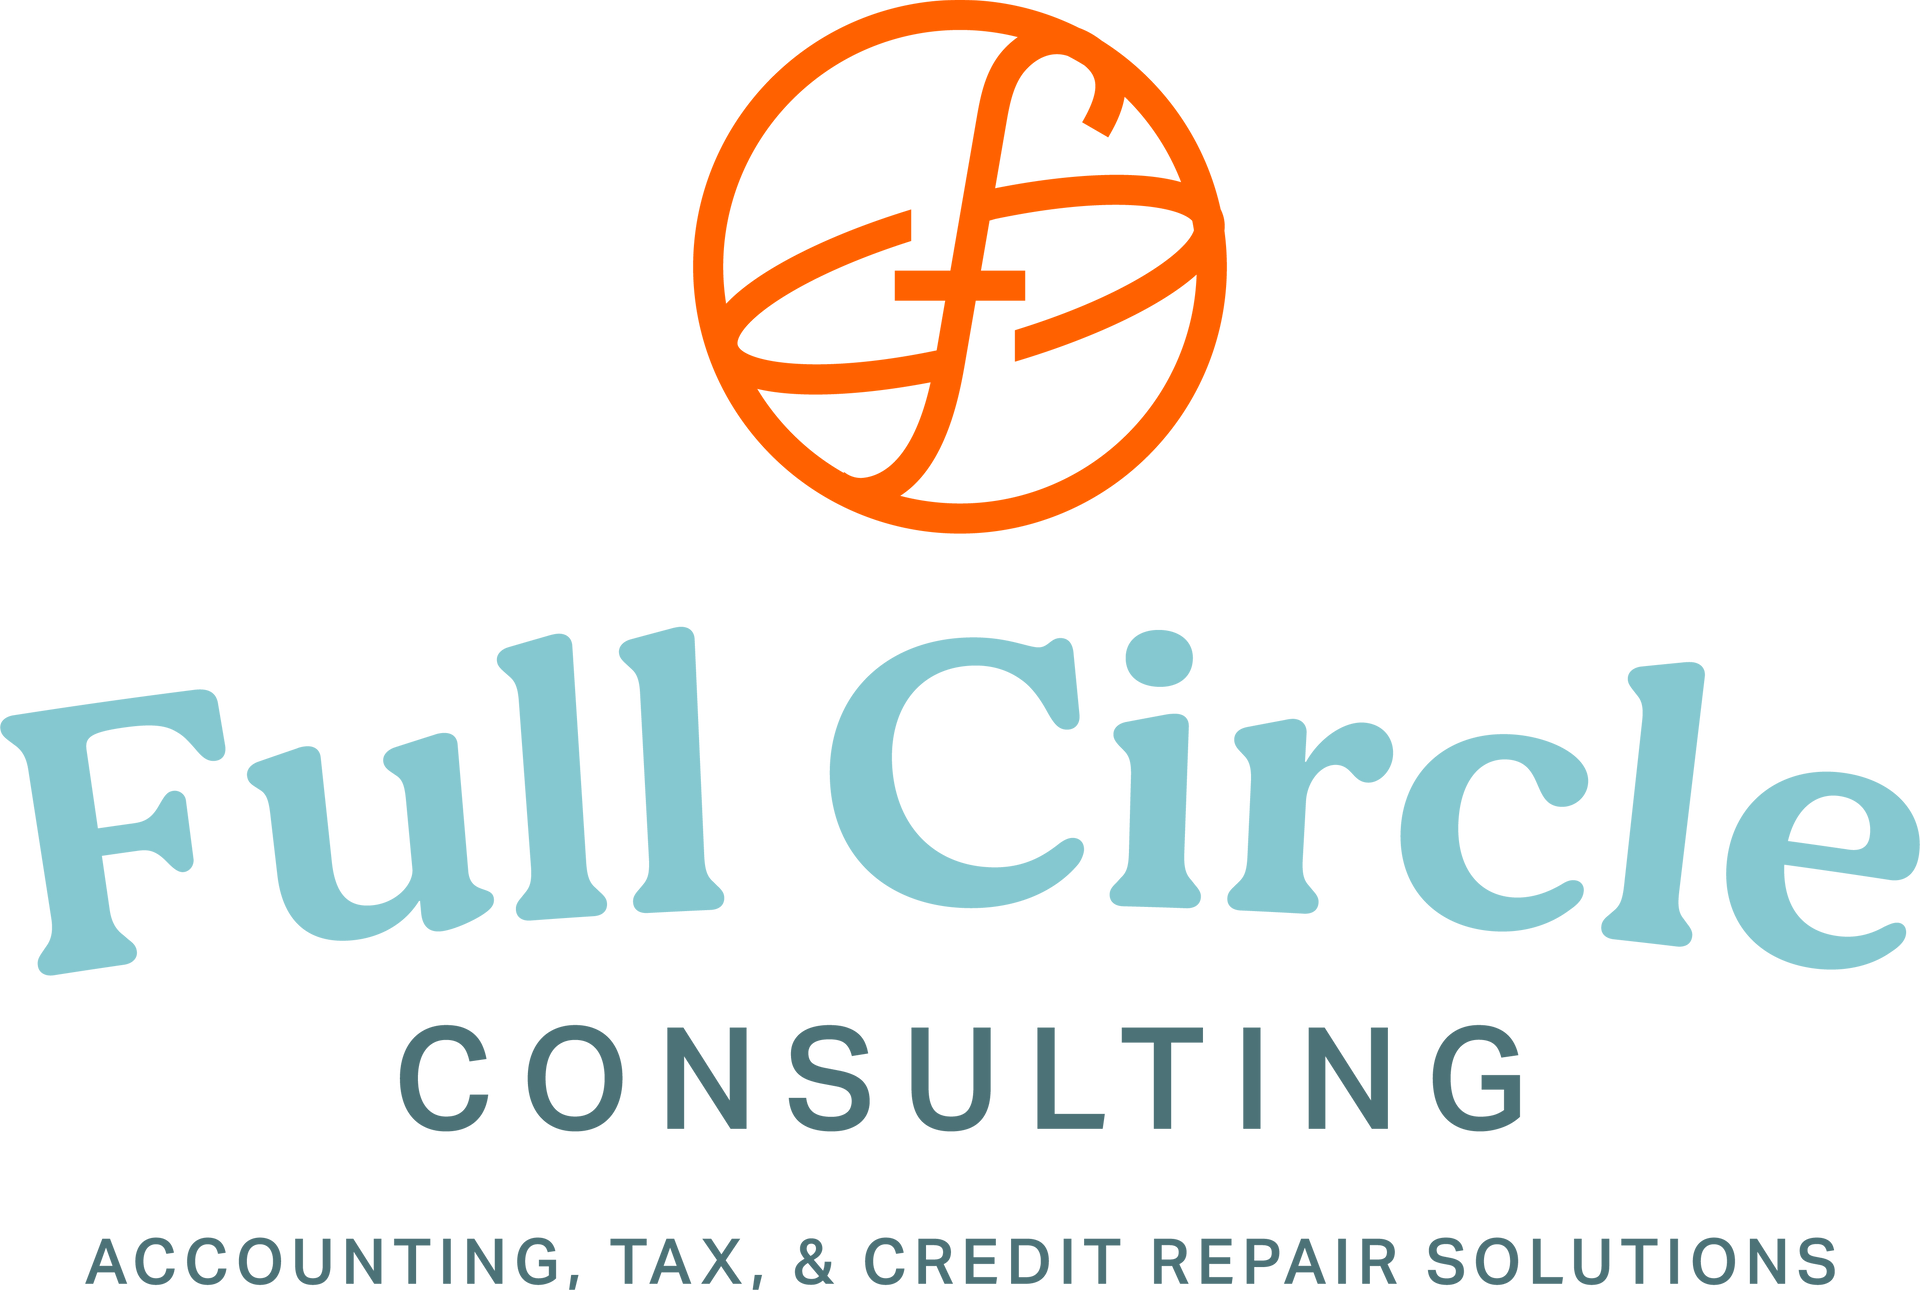 Full Circle Consulting by Divinity